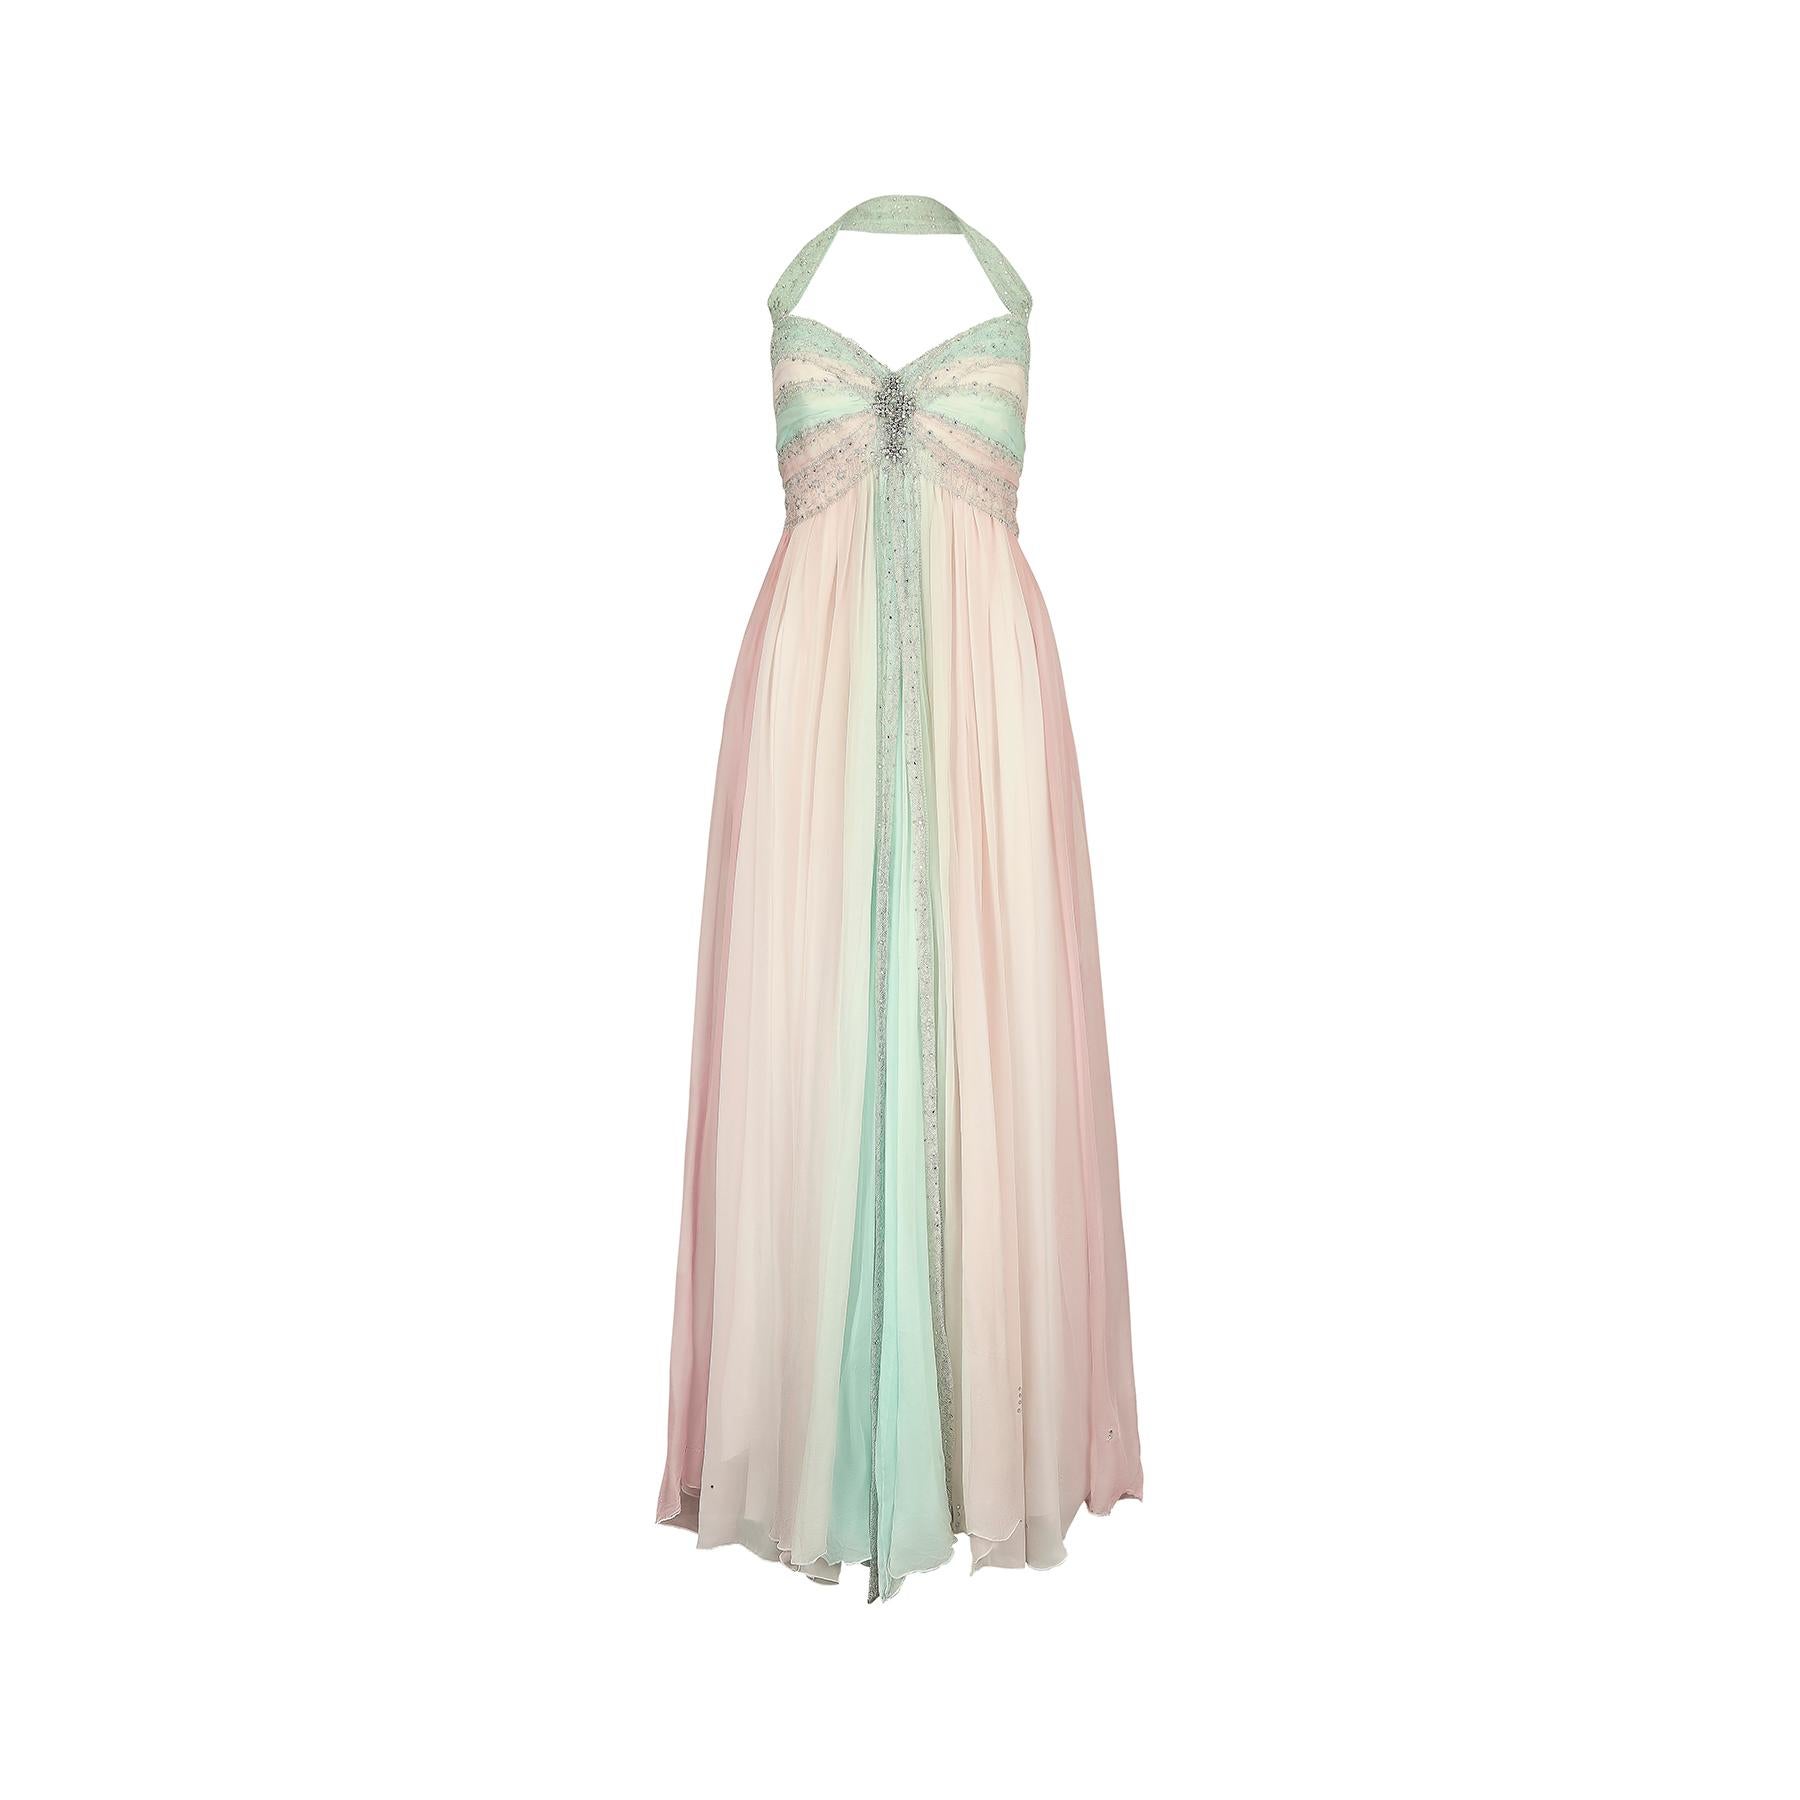 This 1990s bespoke dress reminds me of Laura Hutton's iconic Halston dress that she wore to the 1975 Academy Awards. In fabulous pastel hued shades of pink and turquoise silk chiffon, this halterneck dress has a sweetheart shaped neckline and is